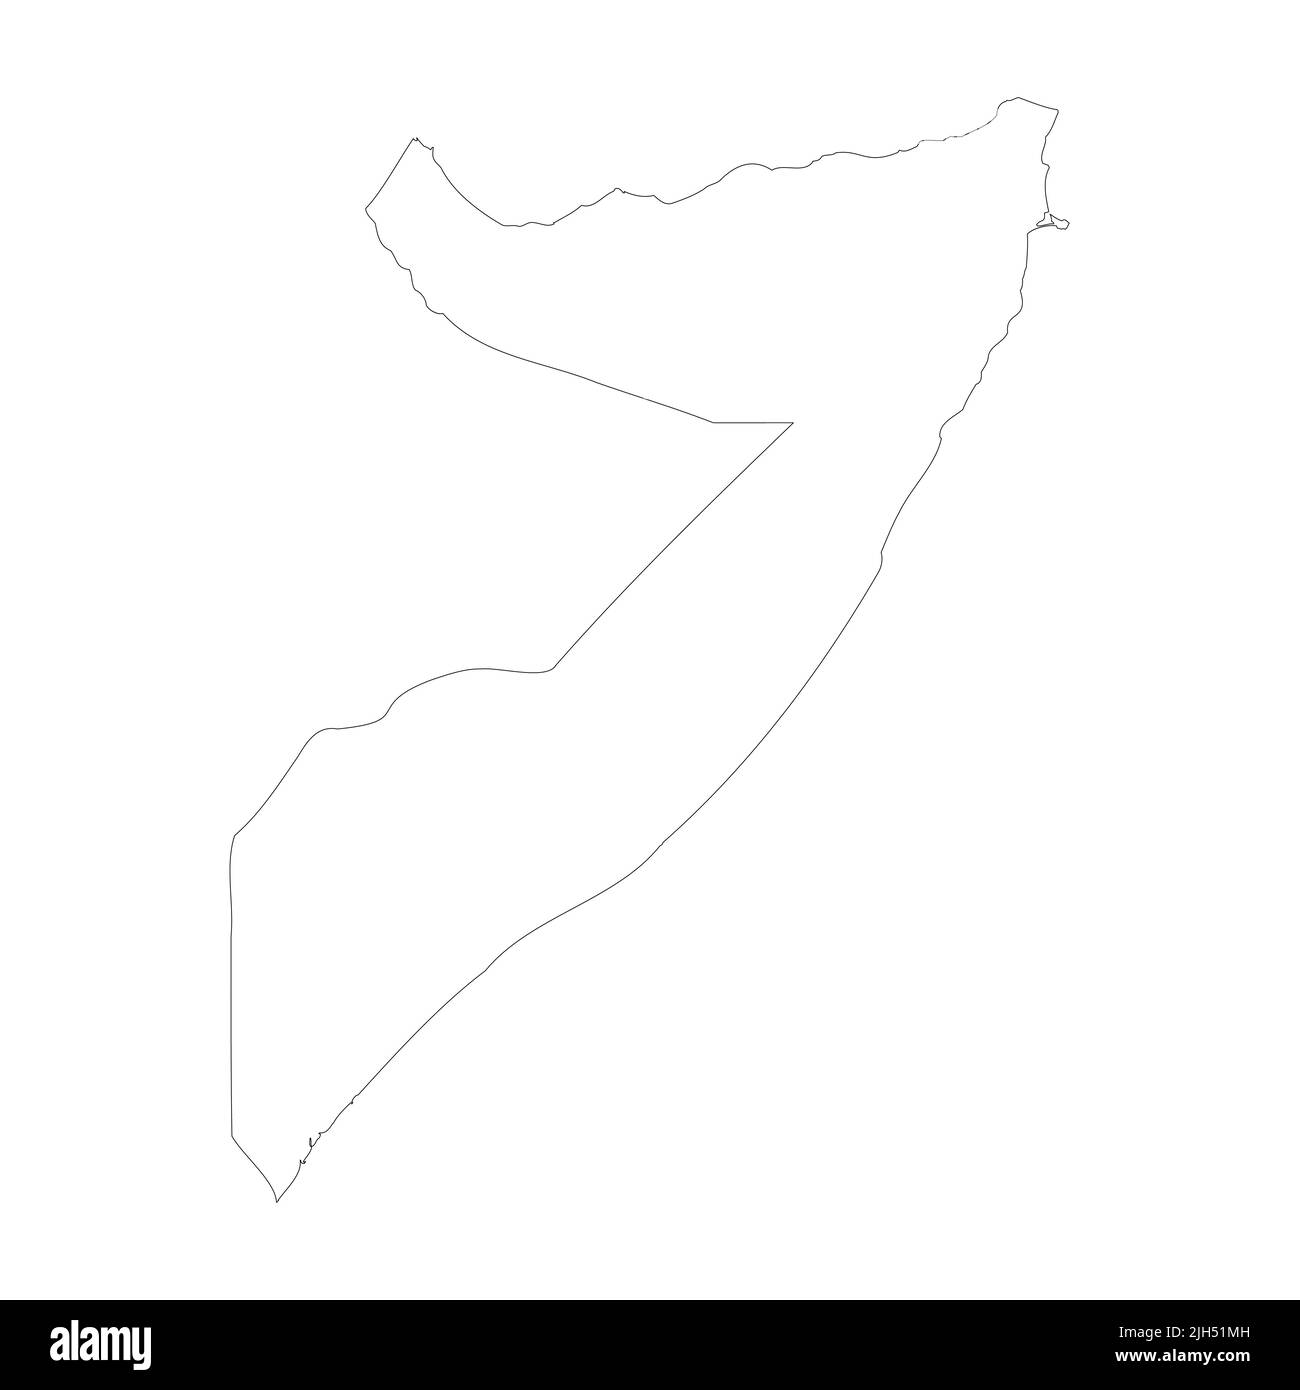 Somalia vector country map outline Stock Vector